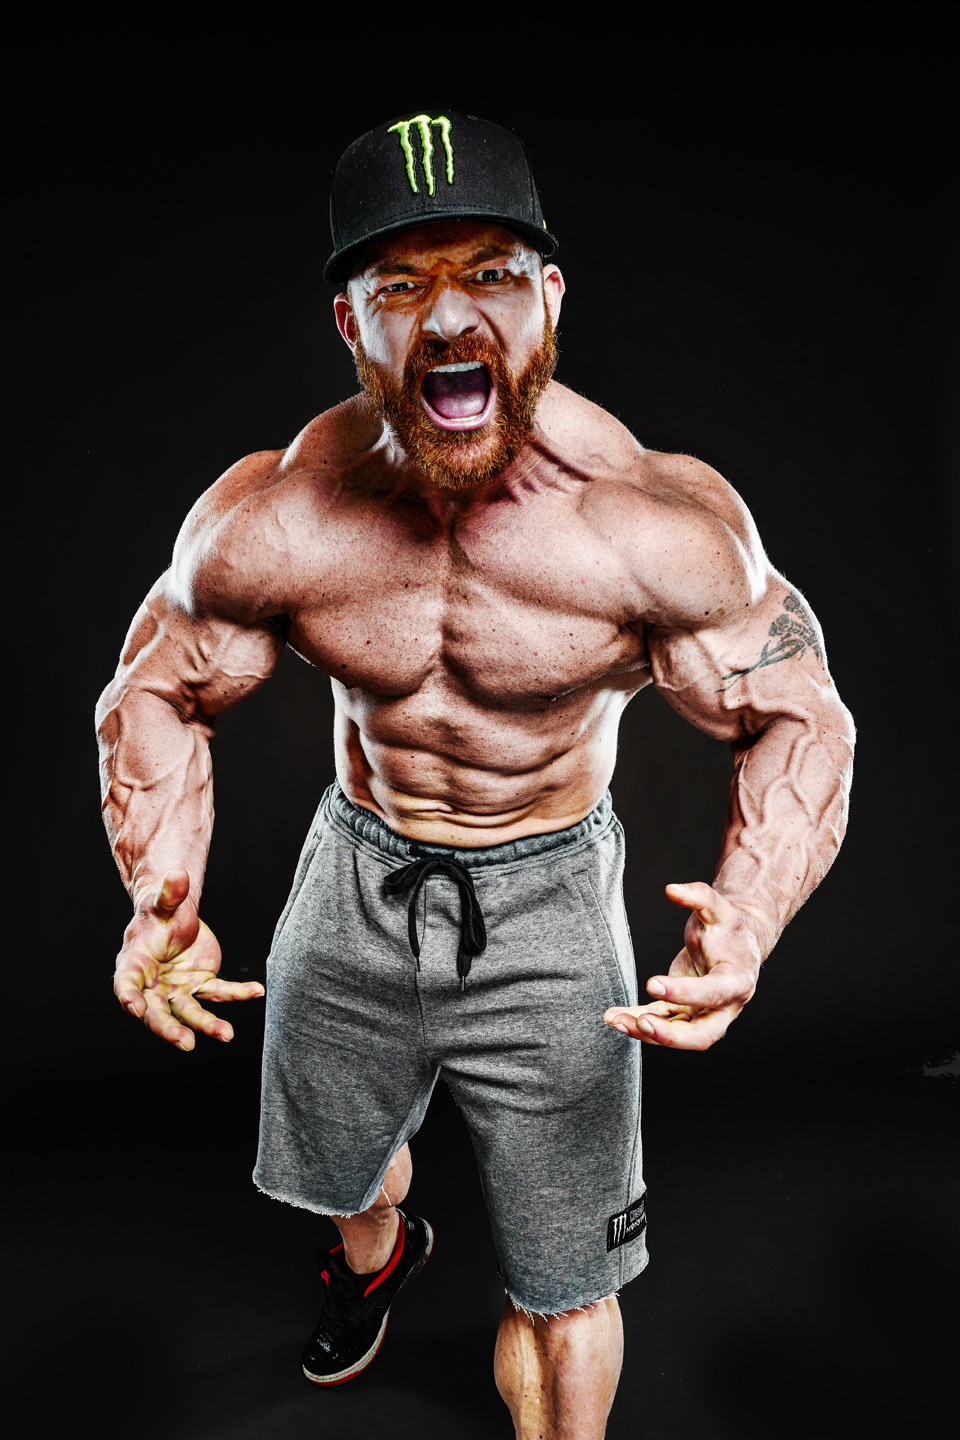 Monster Energy’s James ‘Flex’ Lewis Wins Iconic Mr. Olympia Bodybuilding Competition for 7th Time